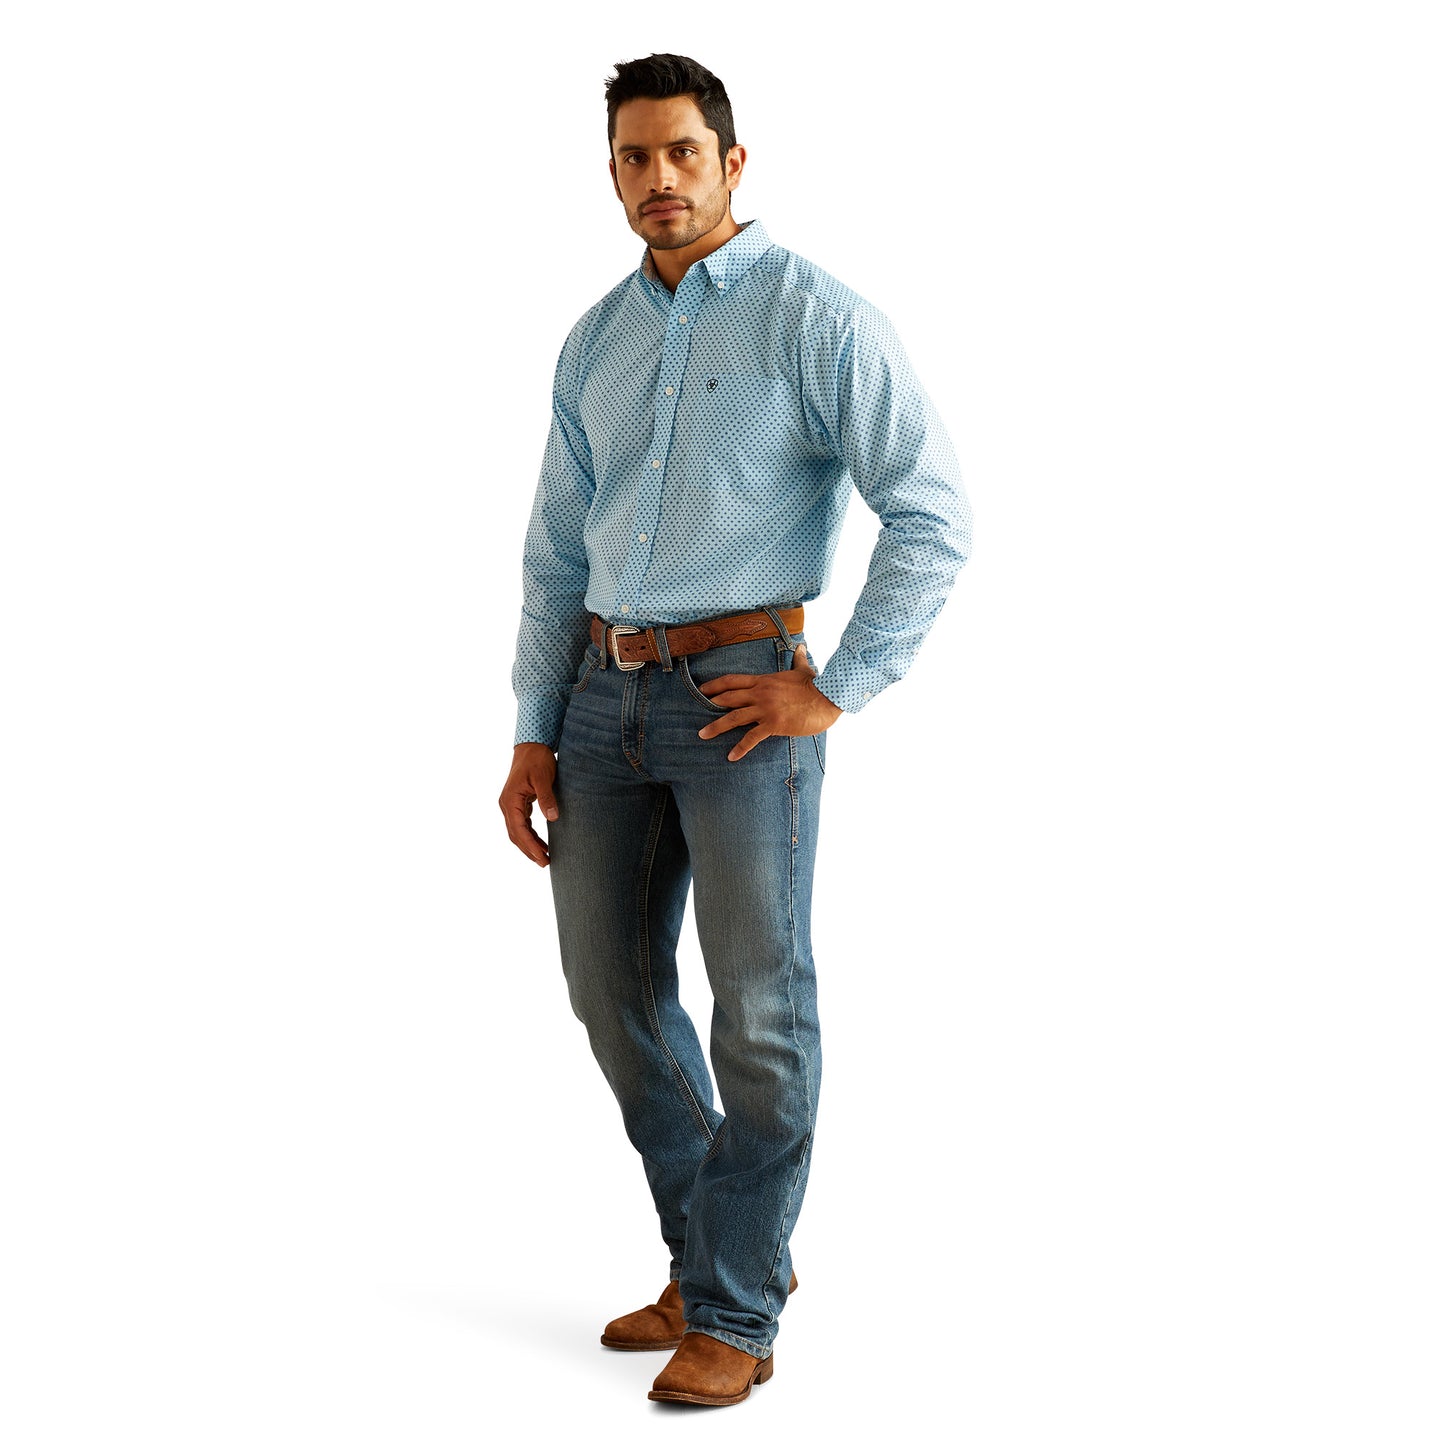 Ariat Men's Wrinkle Free Ricky Sky Blue Classic Fit Shirt 10048367